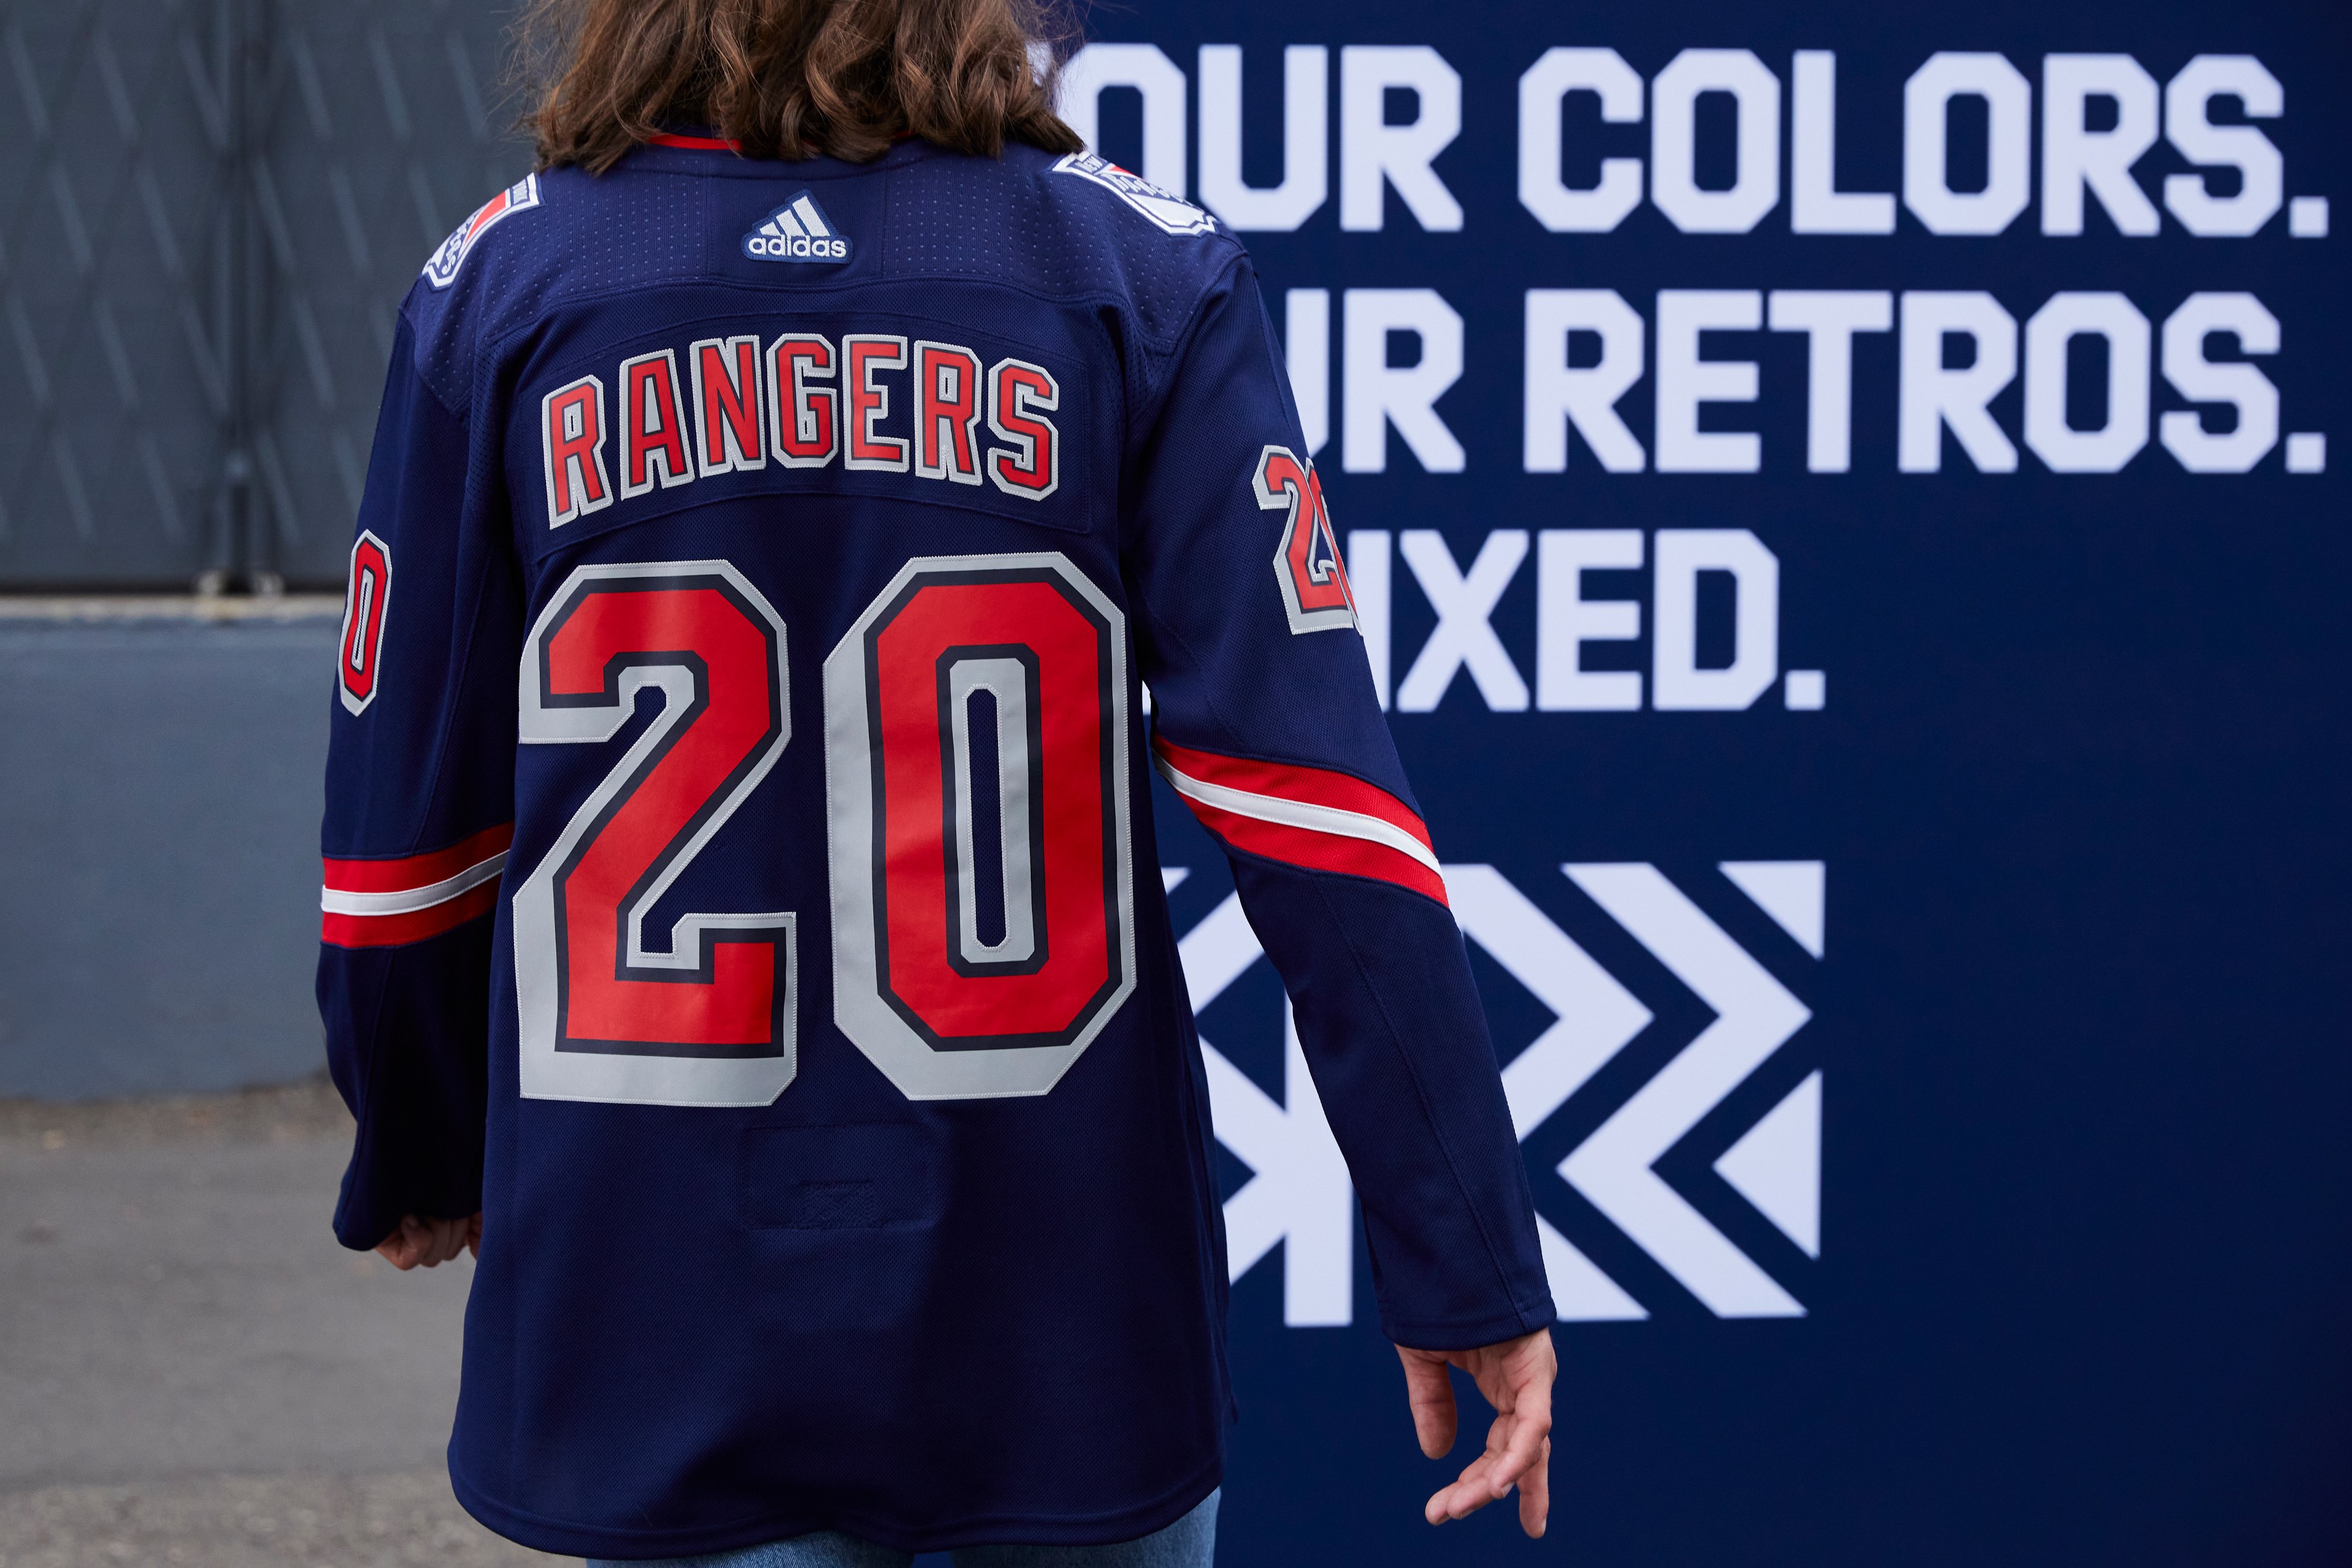 Rangers unveil Lady Liberty retro jerseys while searching for 3-0